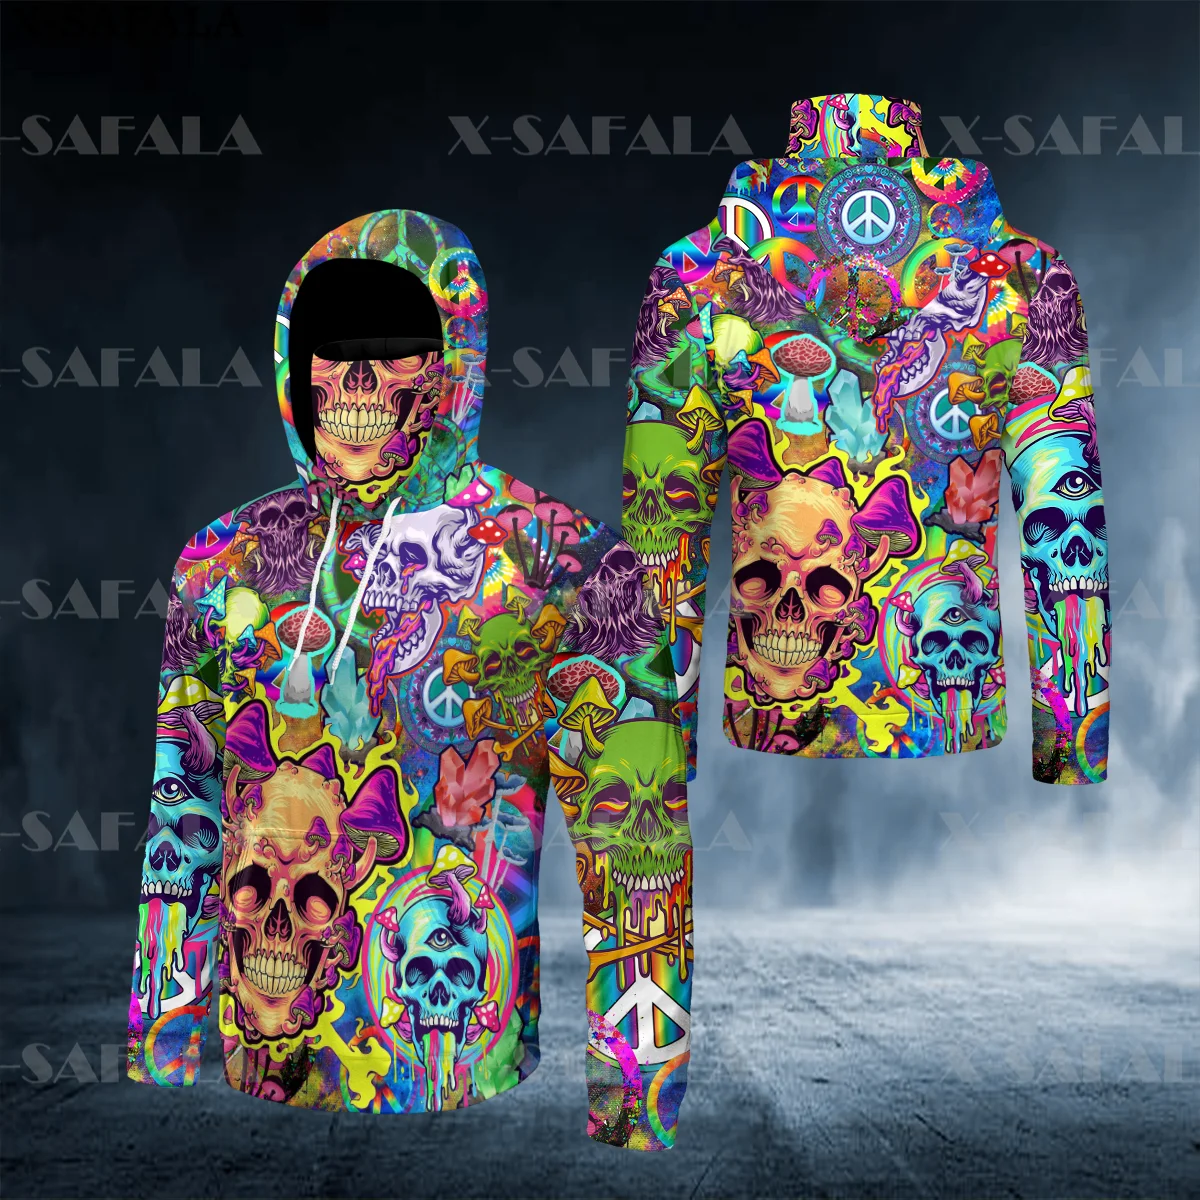 

Nature Fungus Psychedelic Mushroom Trippy 3D Print Face Mask Neck Warm Hoodies Zipper Man Unisex Harajuku Outwear Pullover-1